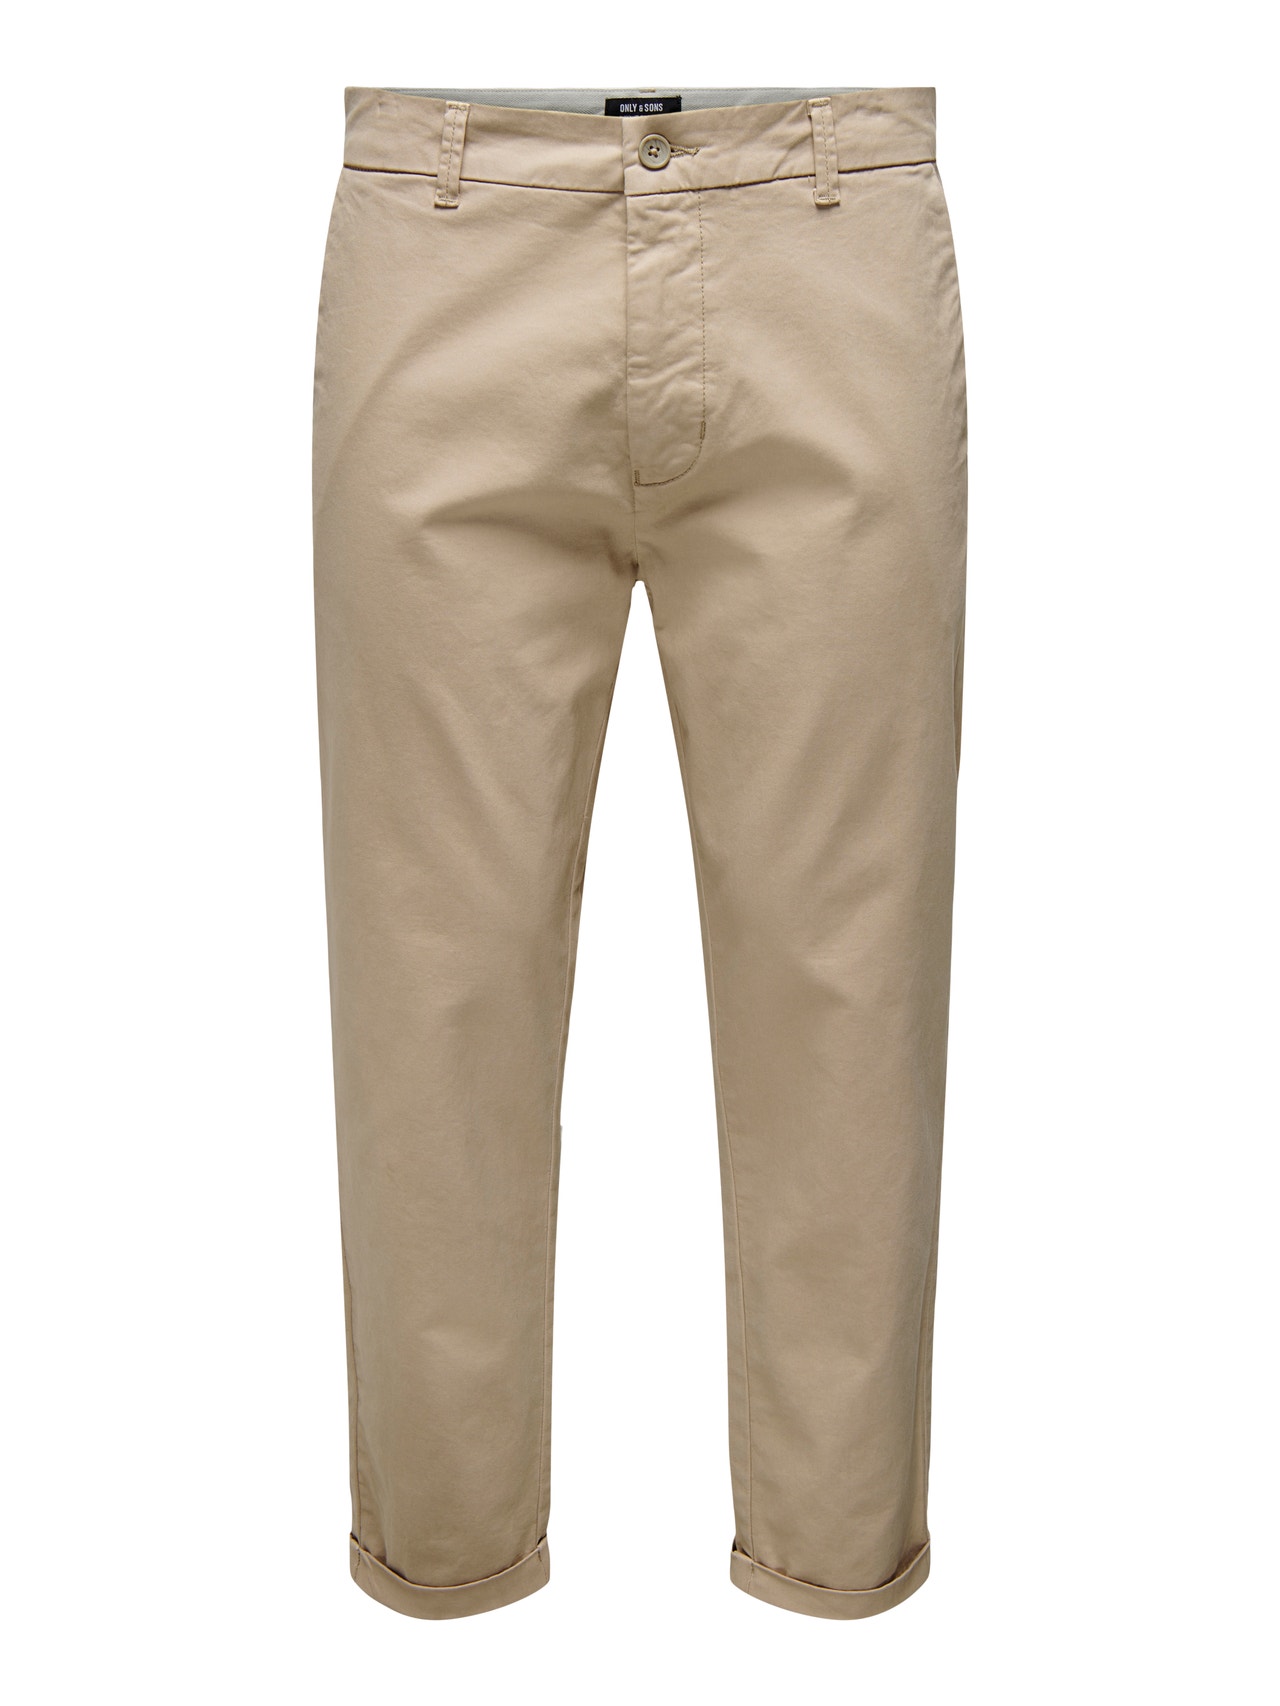 ONLY & SONS Normal geschnitten Chino Hose -Chinchilla - 22020400